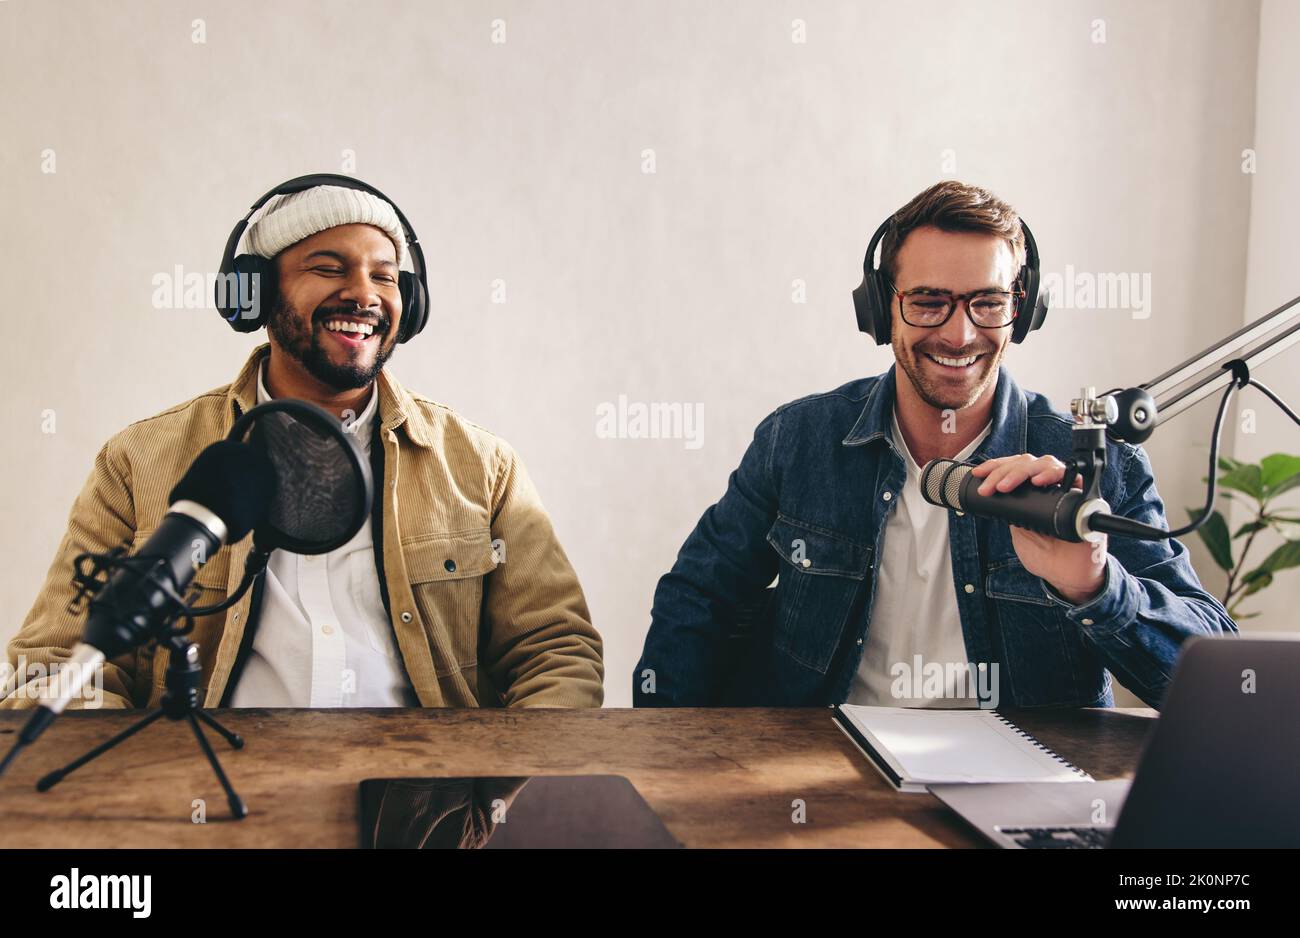 Male radio presenters having a great time on a live show. Two men smiling happily while recording an audio broadcast in a studio. College content crea Stock Photo